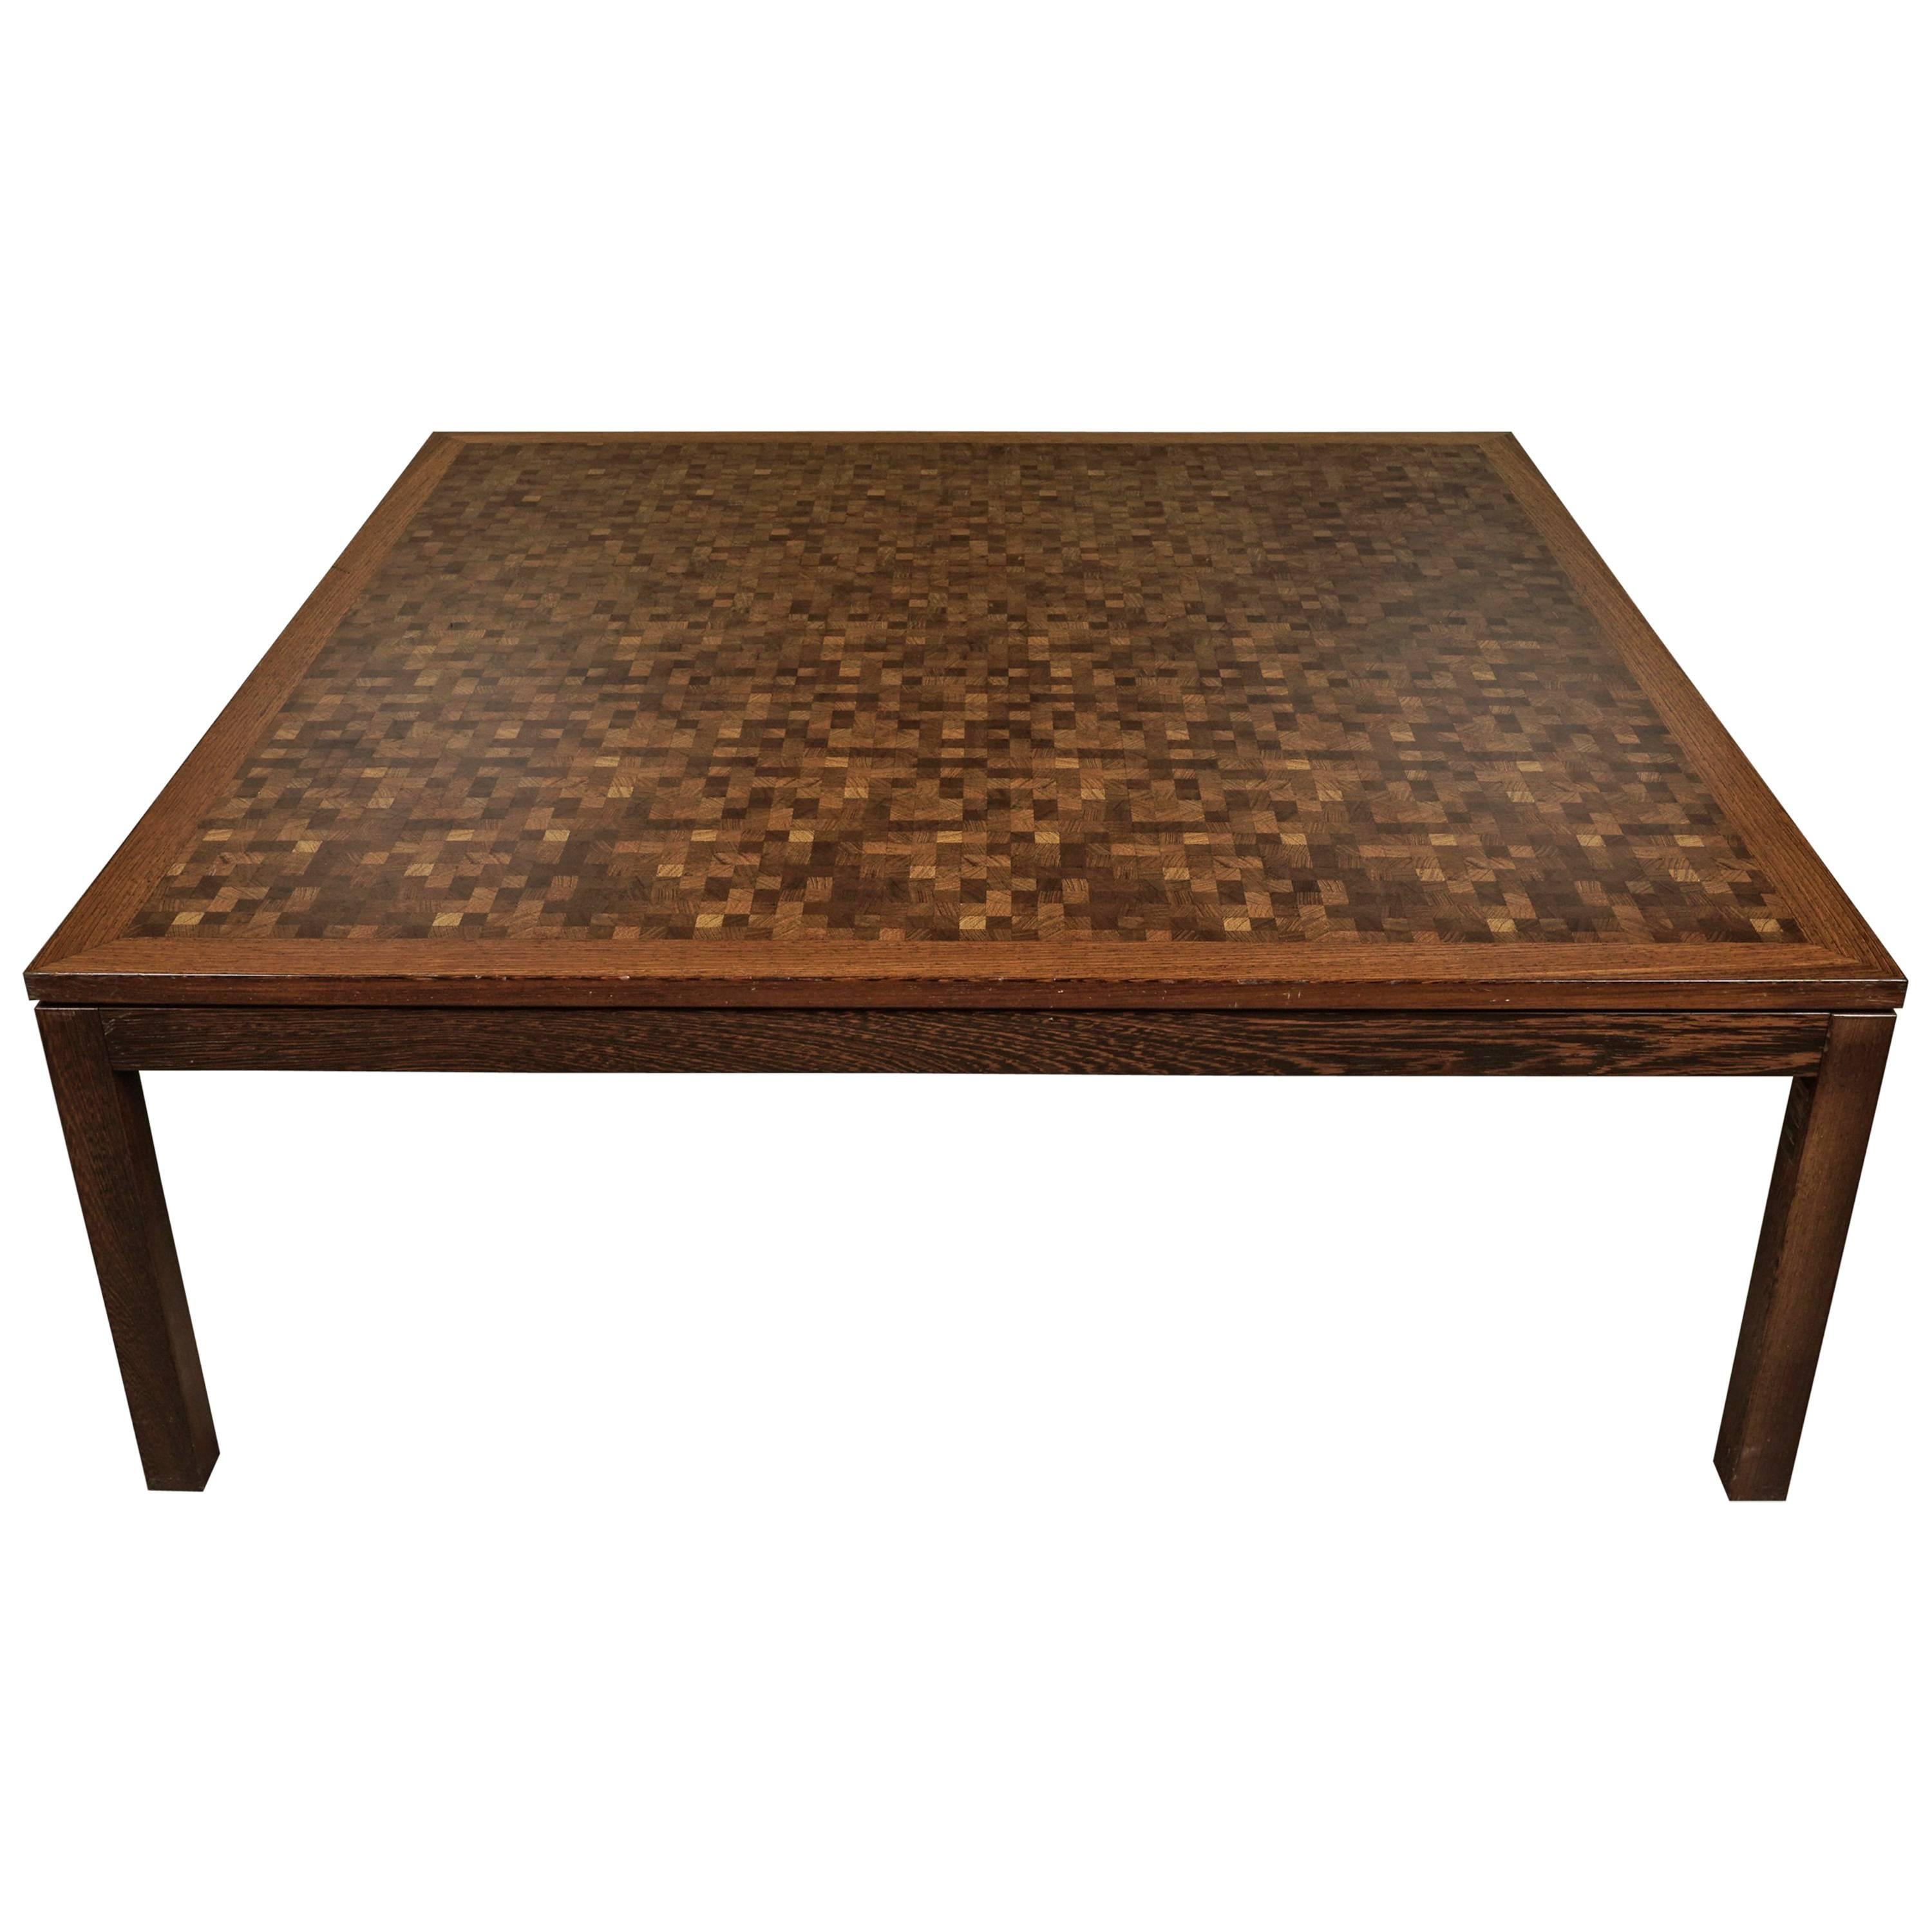 Large Square Patchwork Coffee Table from Denmark, 1970